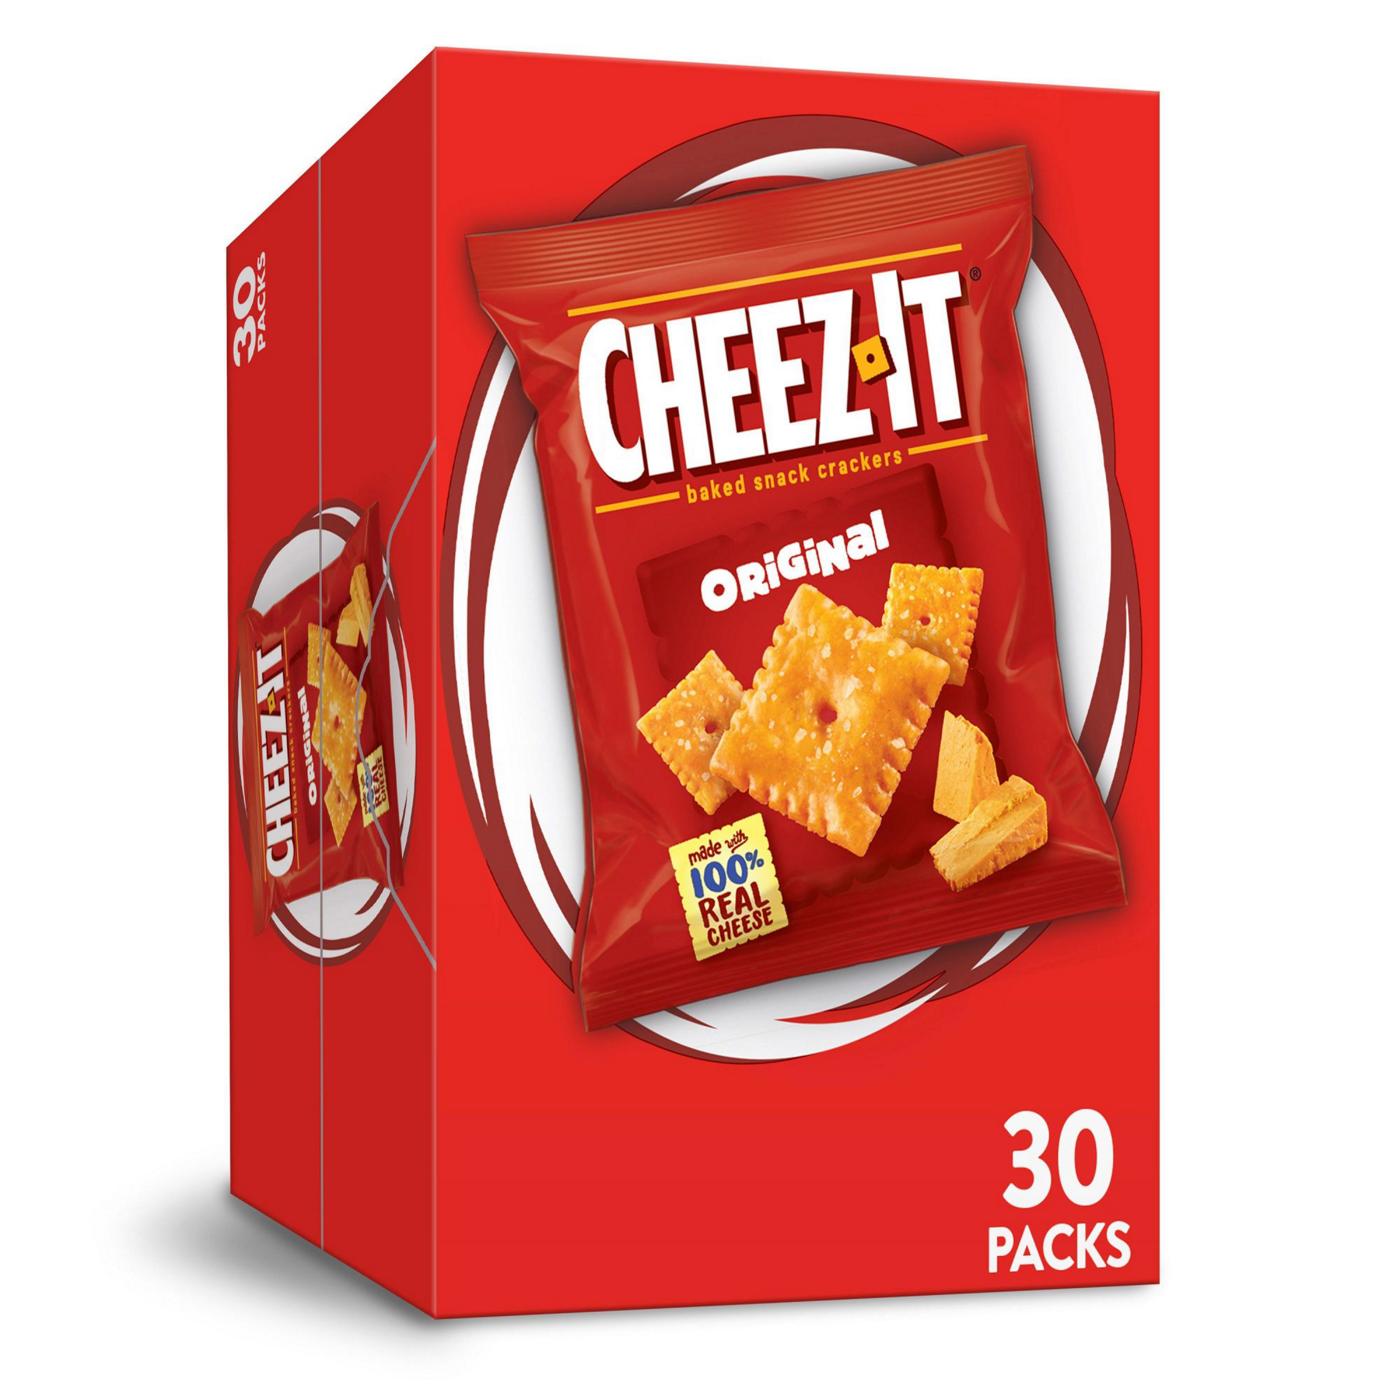 Cheez-It Original Cheese Crackers; image 1 of 6